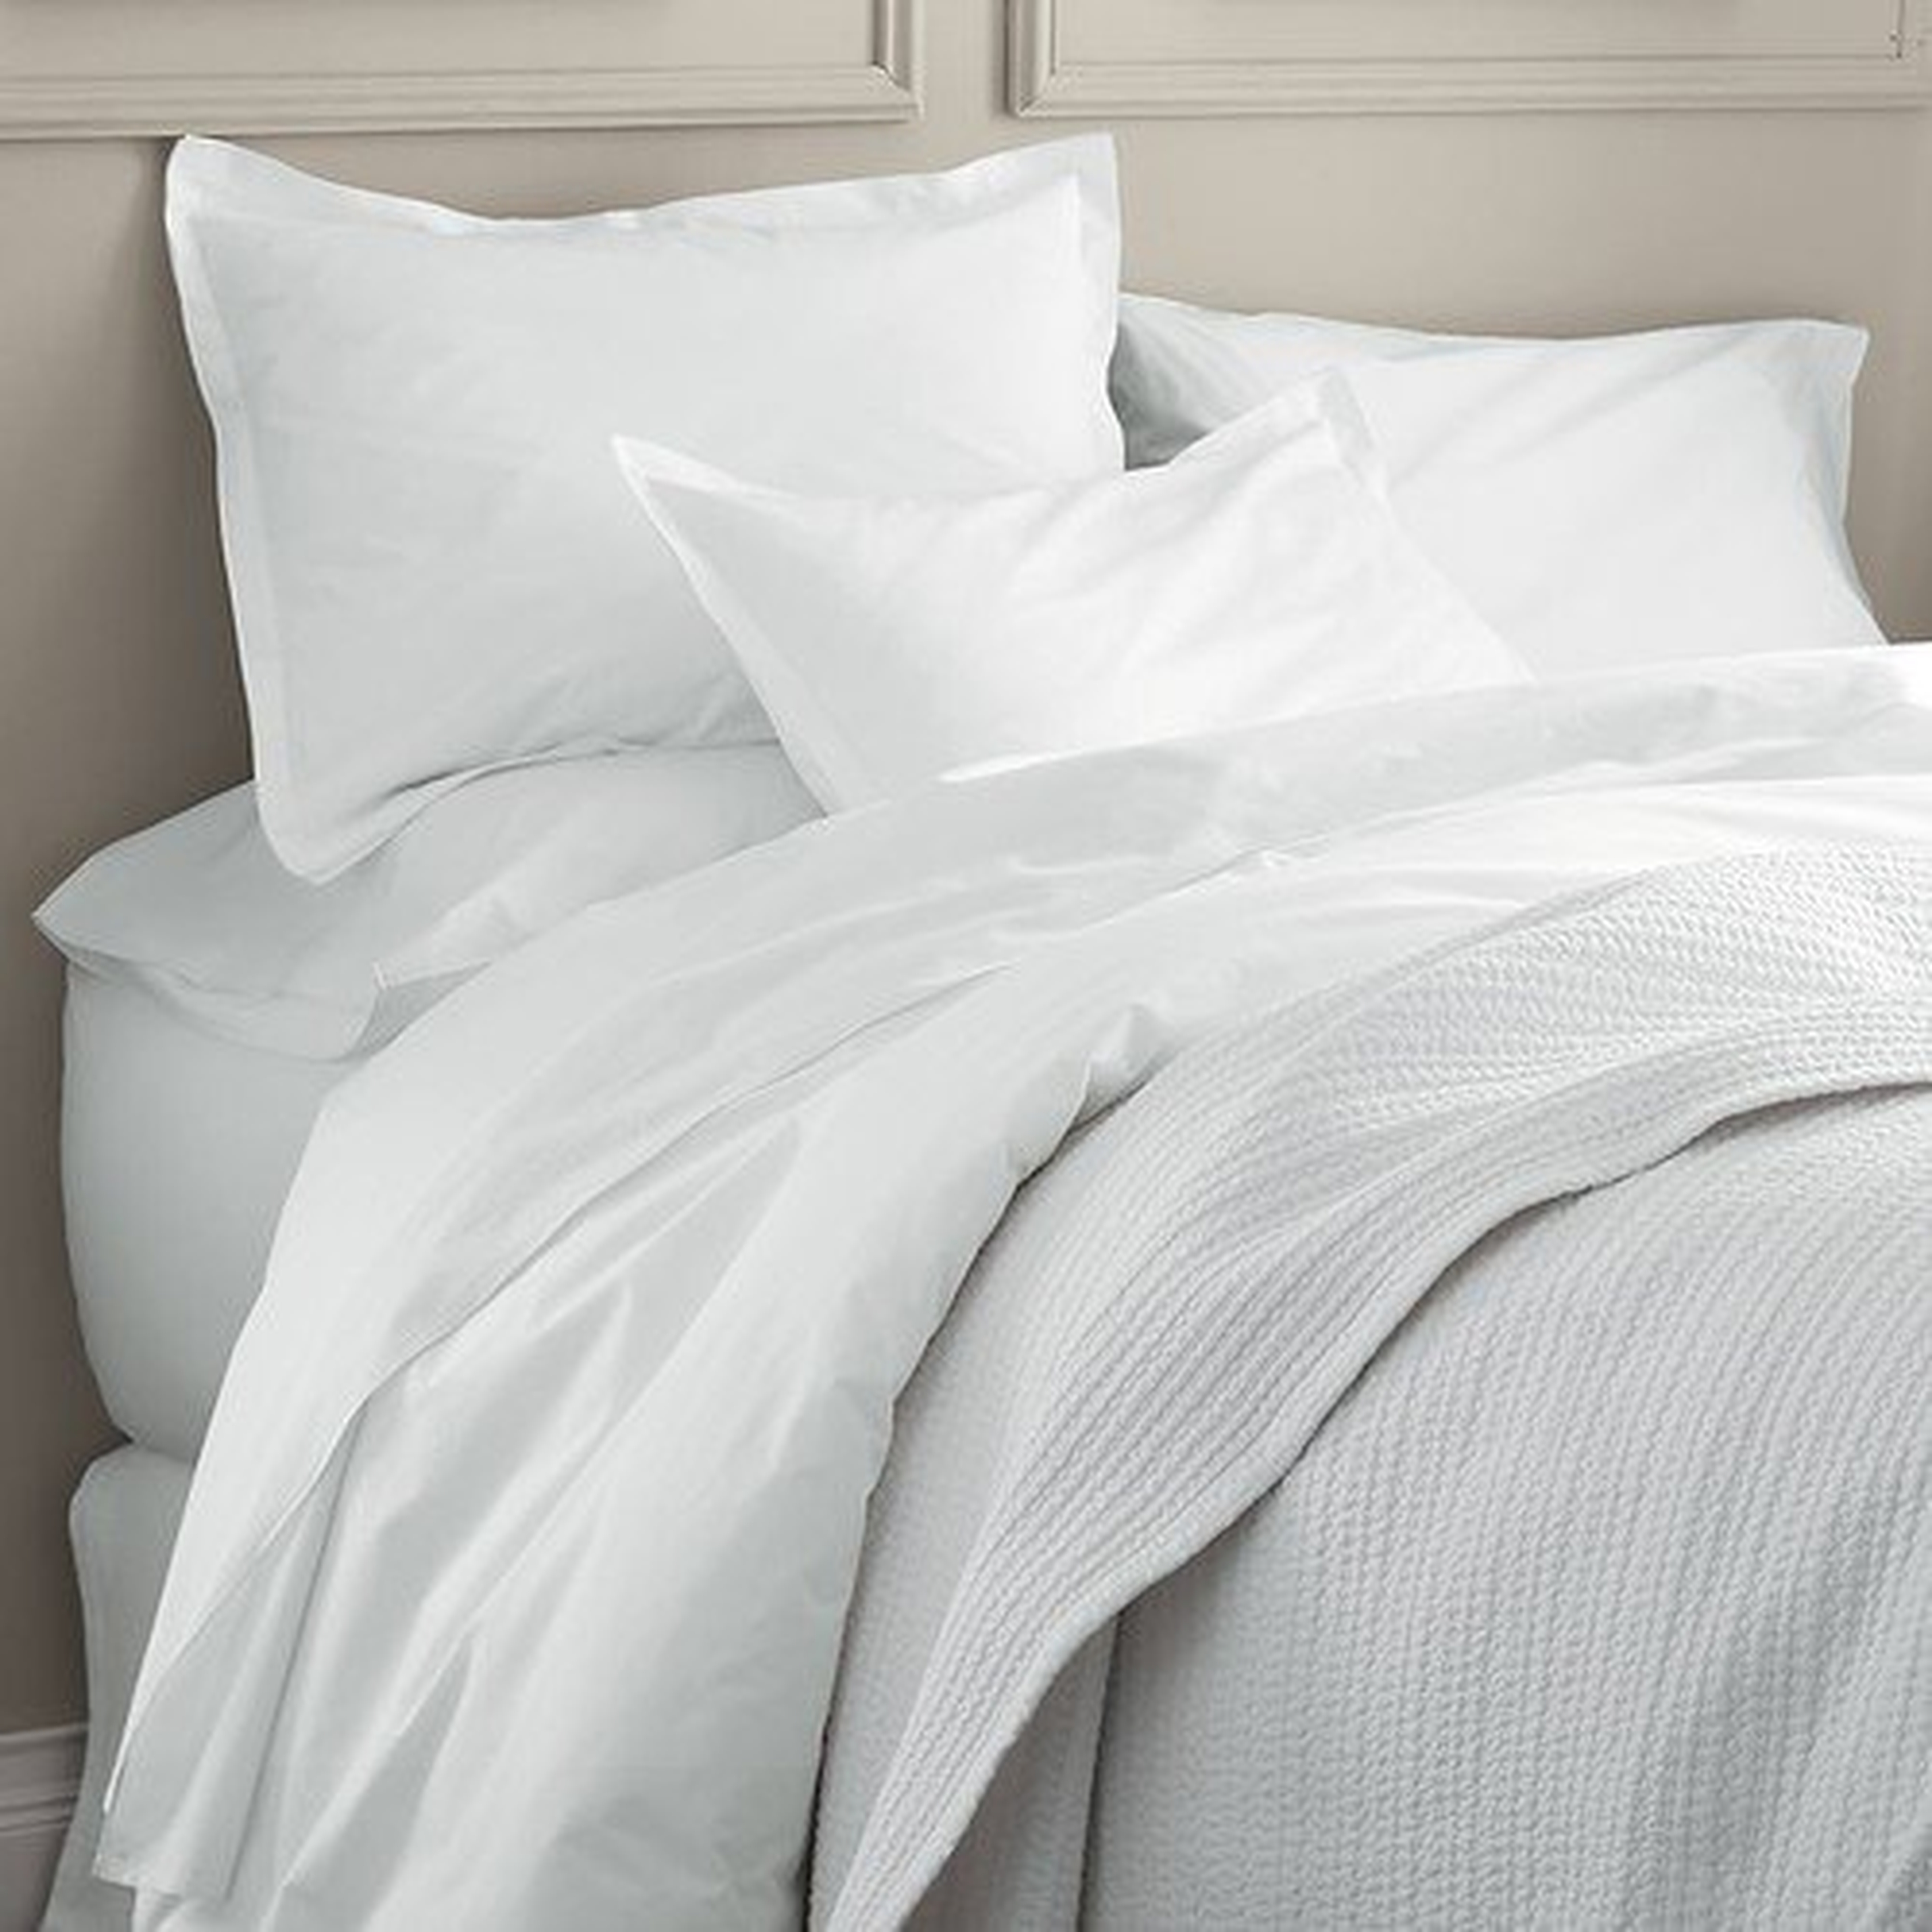 Belo White Queen Duvet Cover - Crate and Barrel